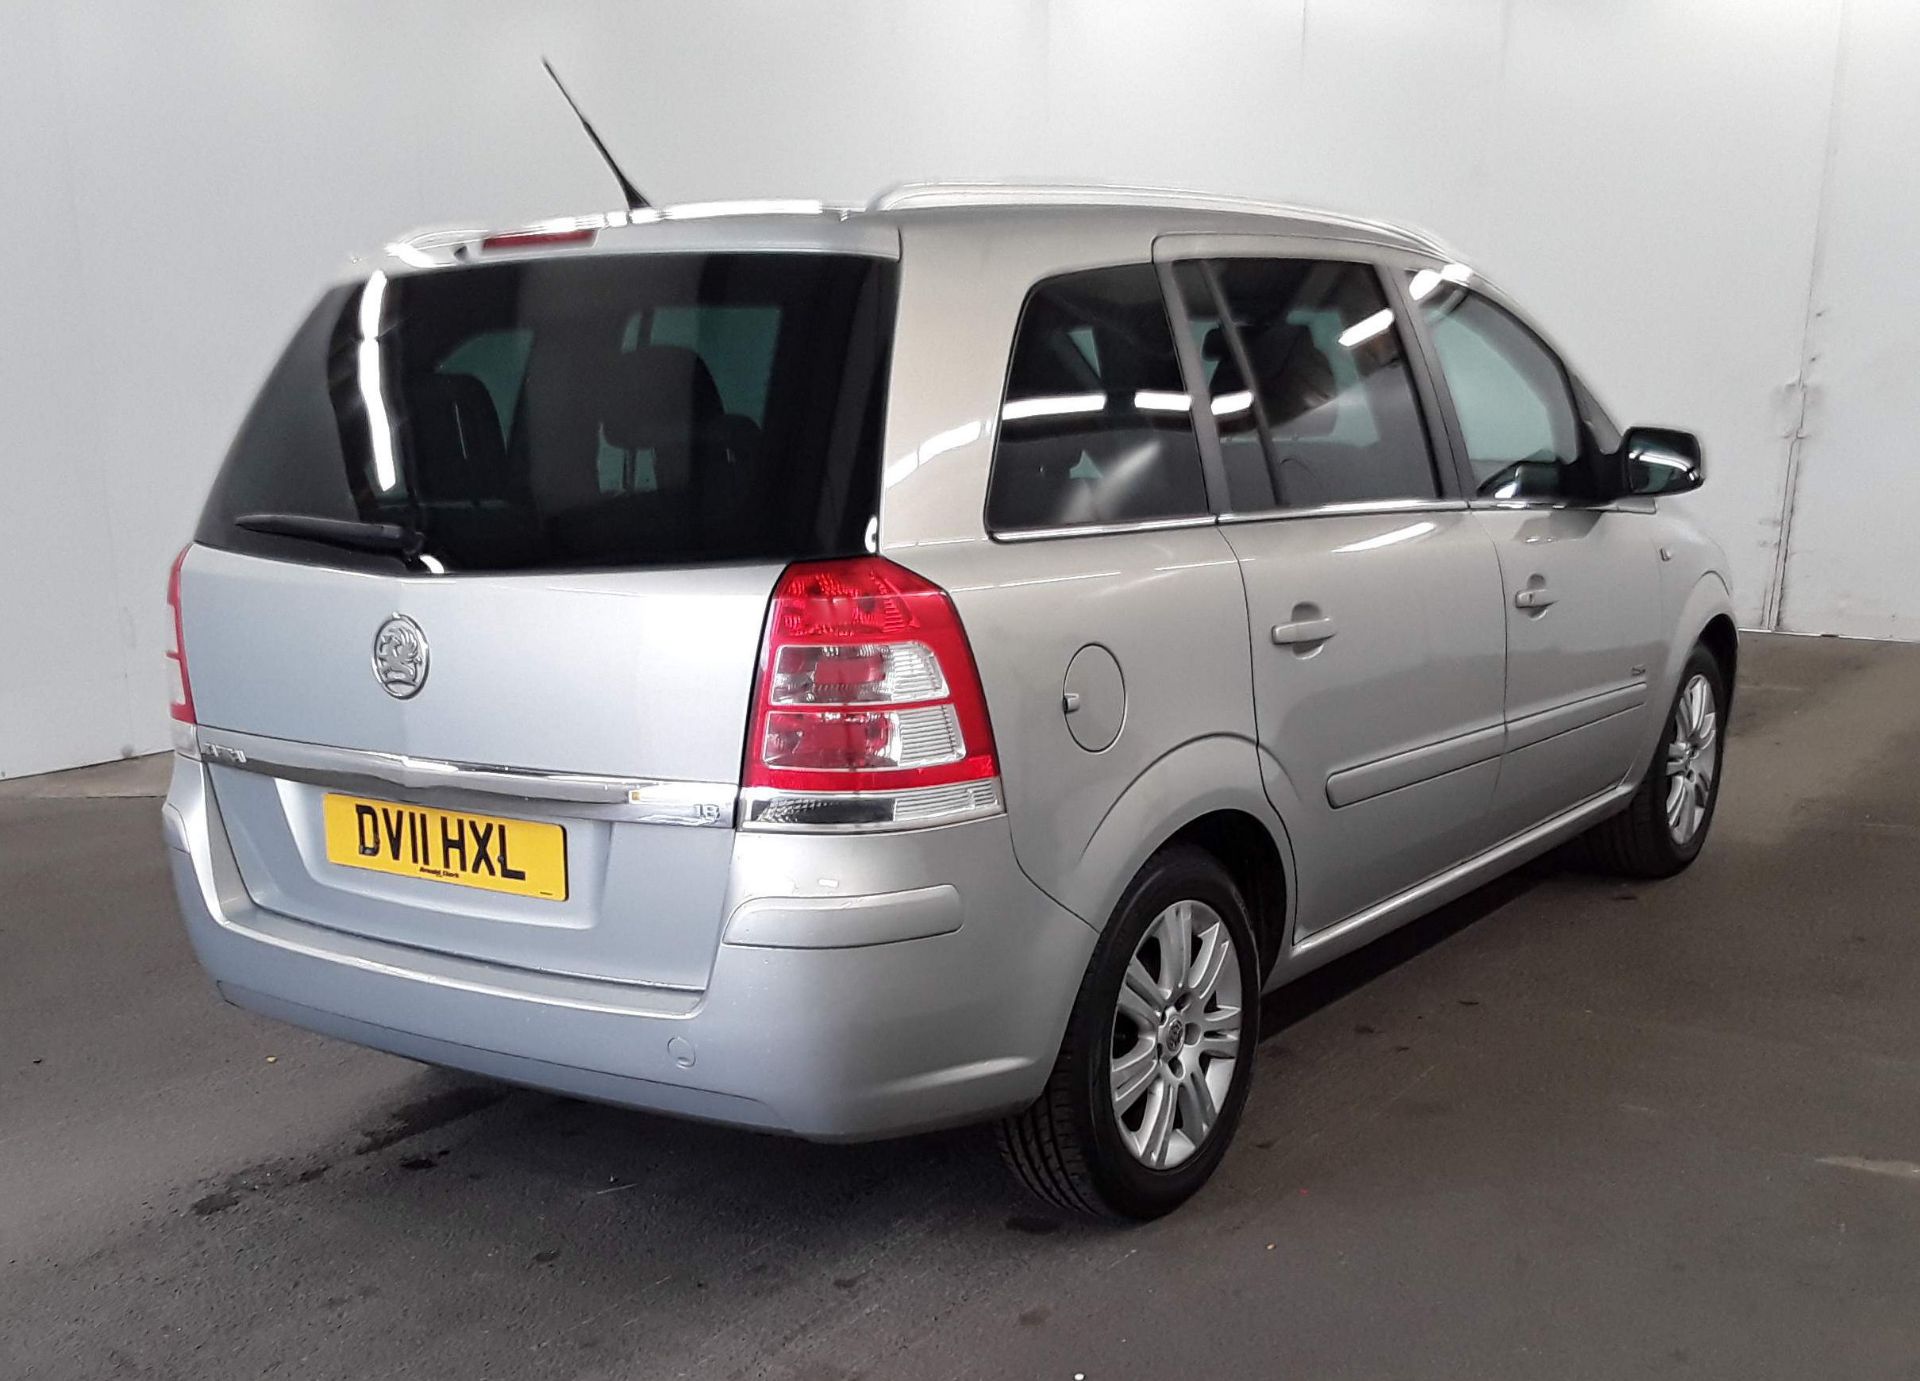 2011 Vauxhall Zafira 1.8 Design 5 Door MPV - CL505 - NO VAT ON THE HAMMER - Location: Corby - Image 5 of 12